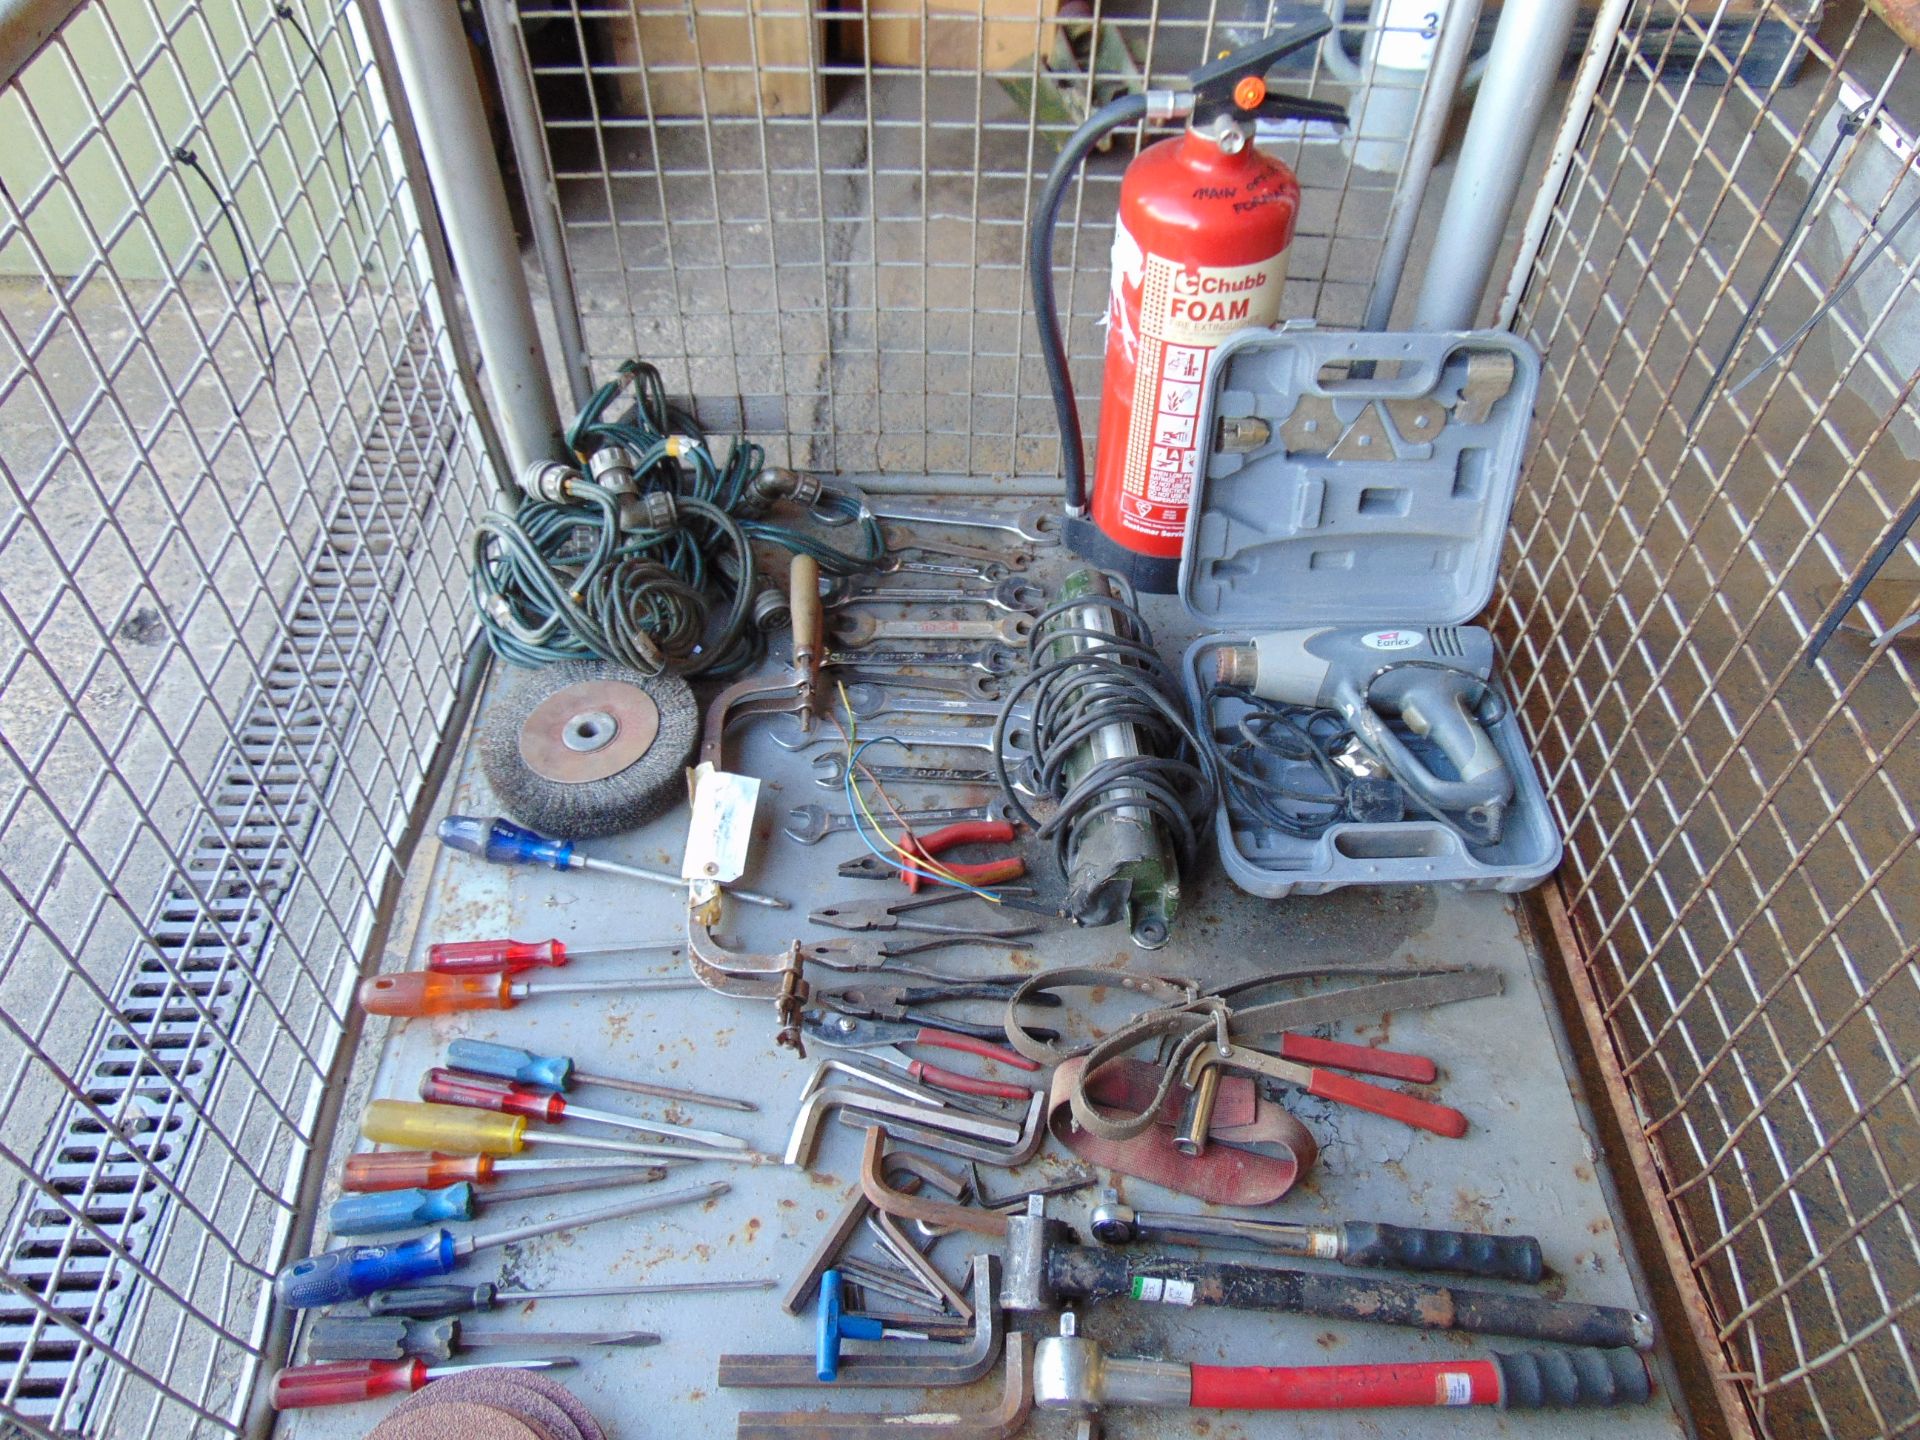 1 x Stillage of Workshop Tools, Spanners, Lights, Torque Wrenches etc - Image 2 of 8